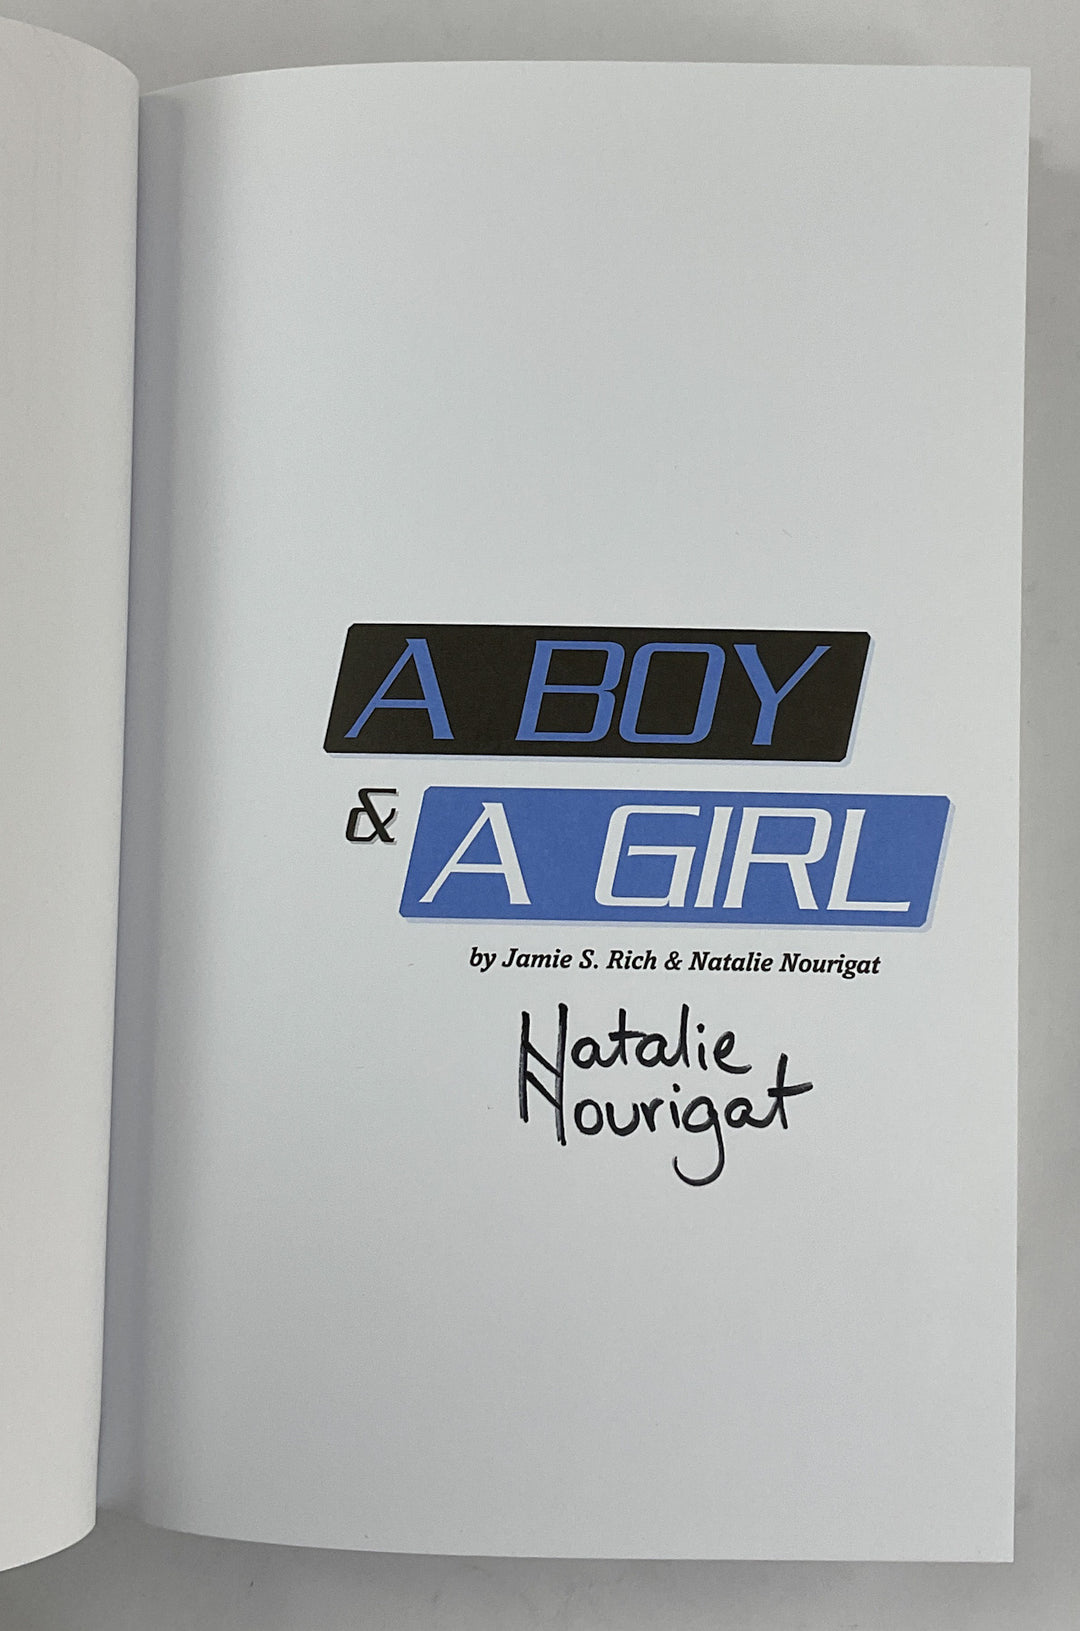 A Boy & A Girl - Hardcover First Signed by the Artist